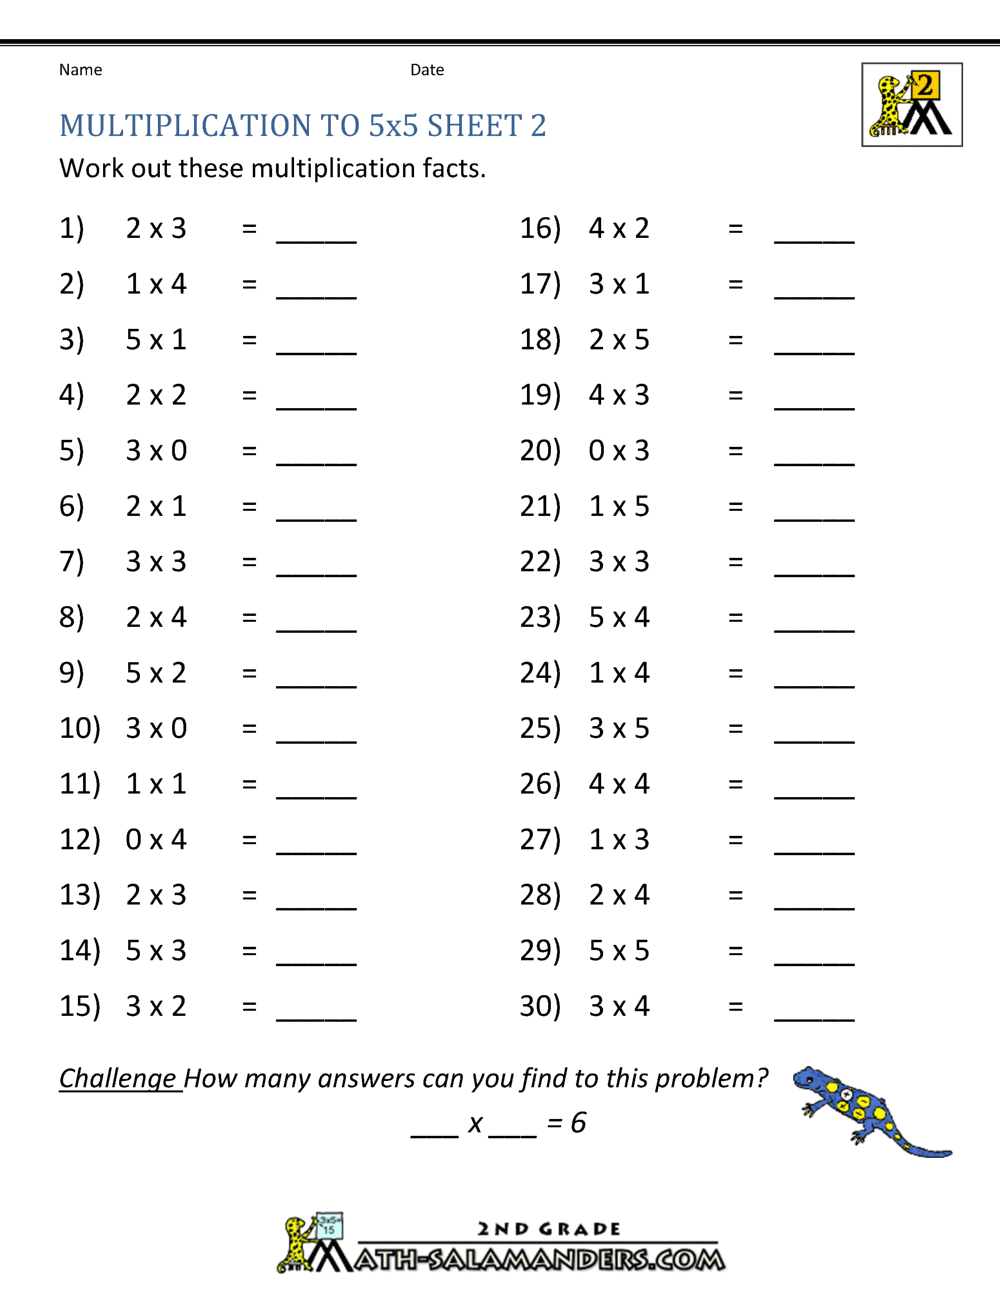 free-printable-multiplication-worksheets-multiplication-to-5x5-2-gif-1